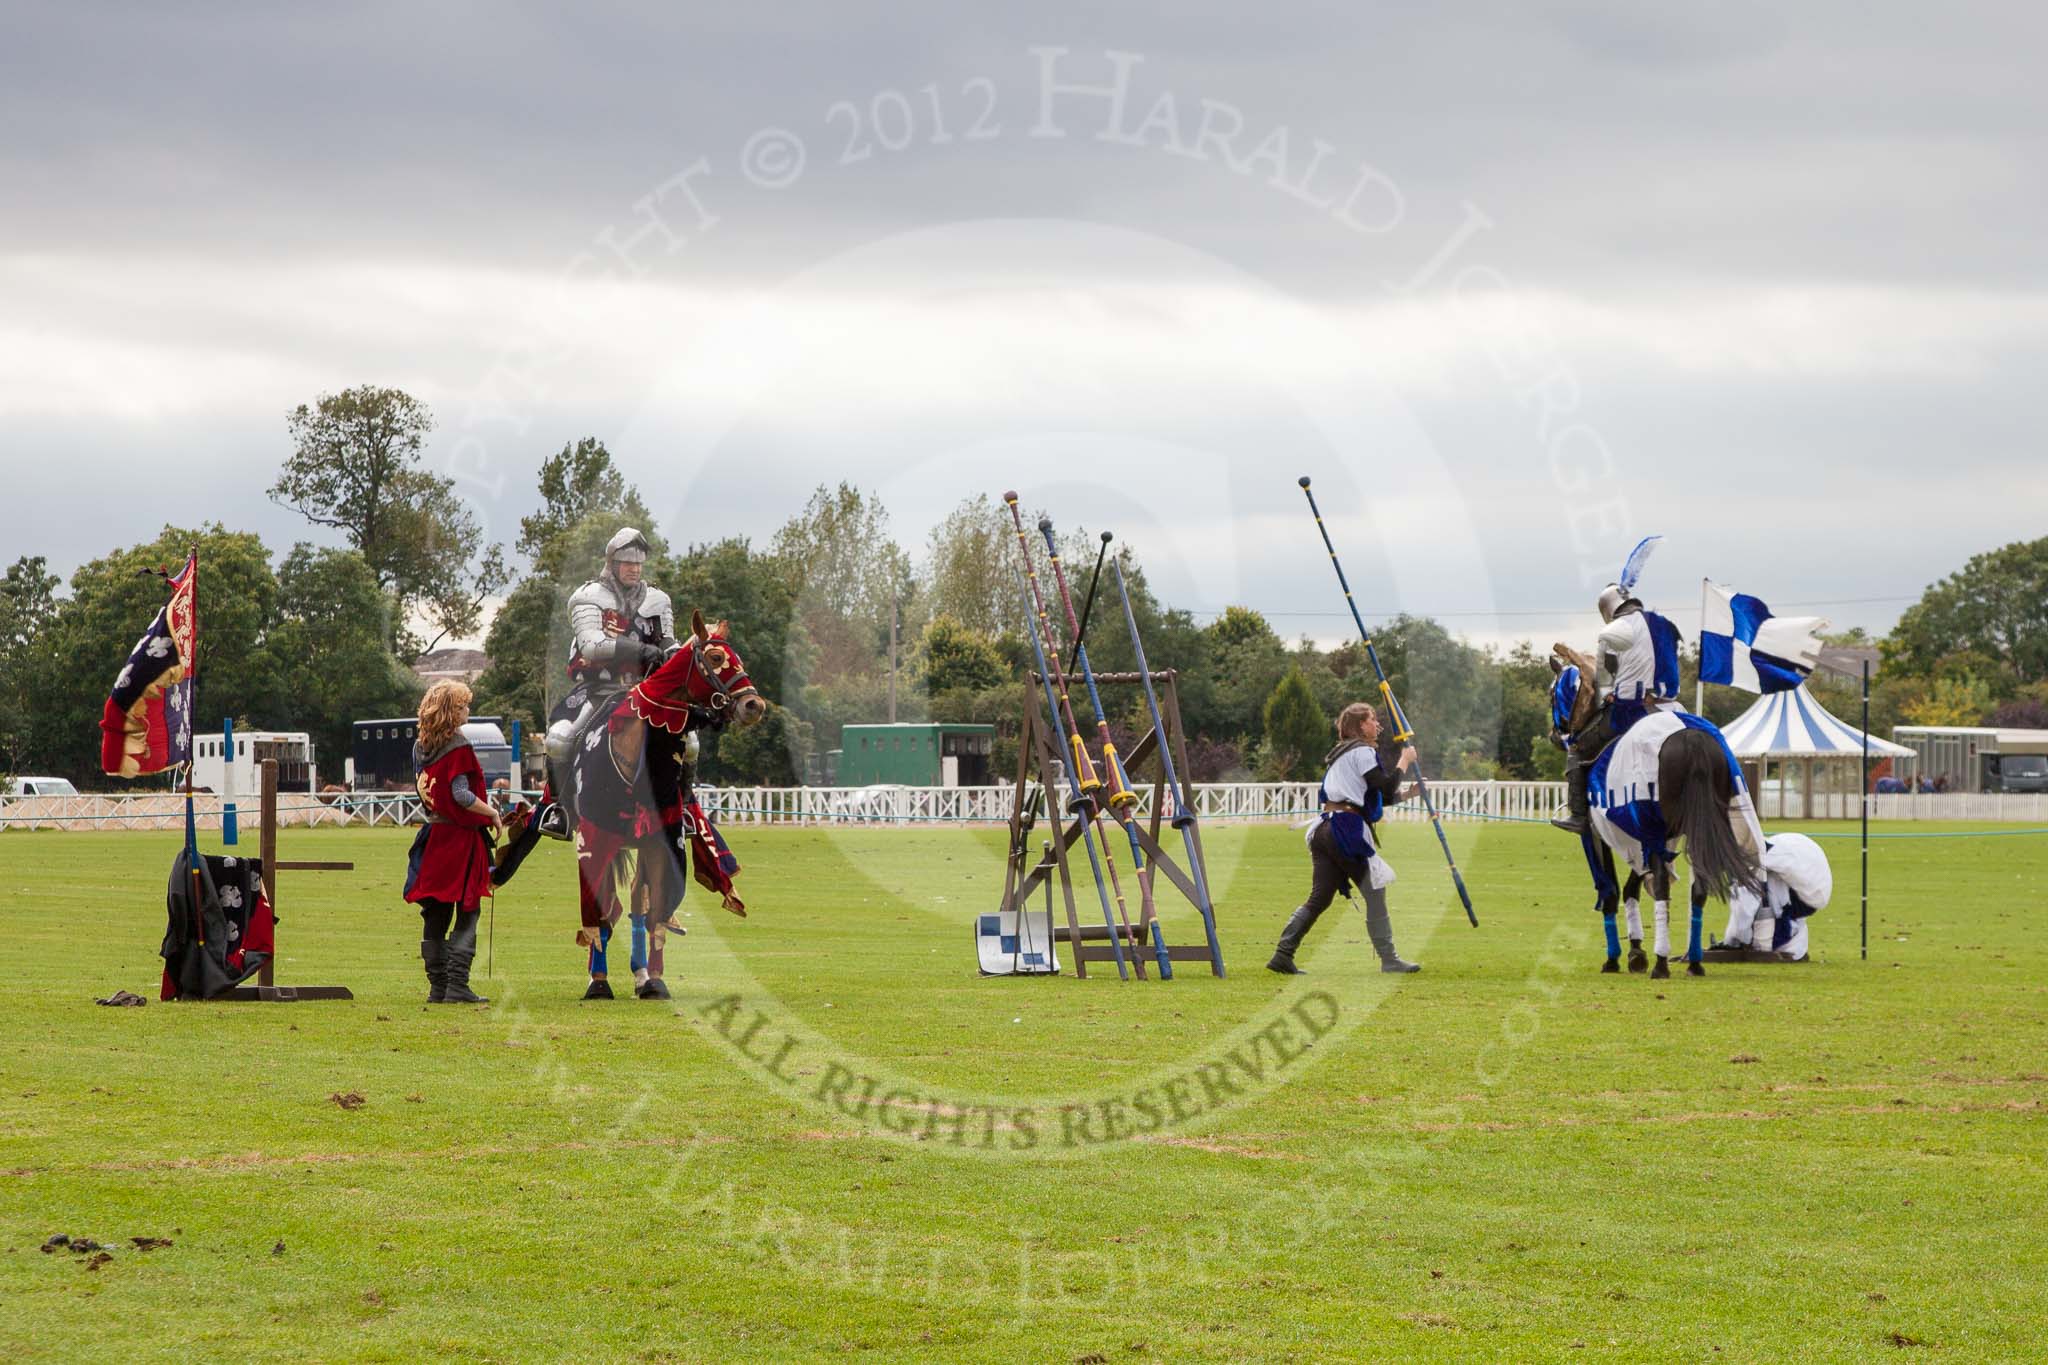 DBPC Polo in the Park 2012: The Knights of Middle England and their Jousting display..
Dallas Burston Polo Club,
Stoneythorpe Estate,
Southam,
Warwickshire,
United Kingdom,
on 16 September 2012 at 14:33, image #201